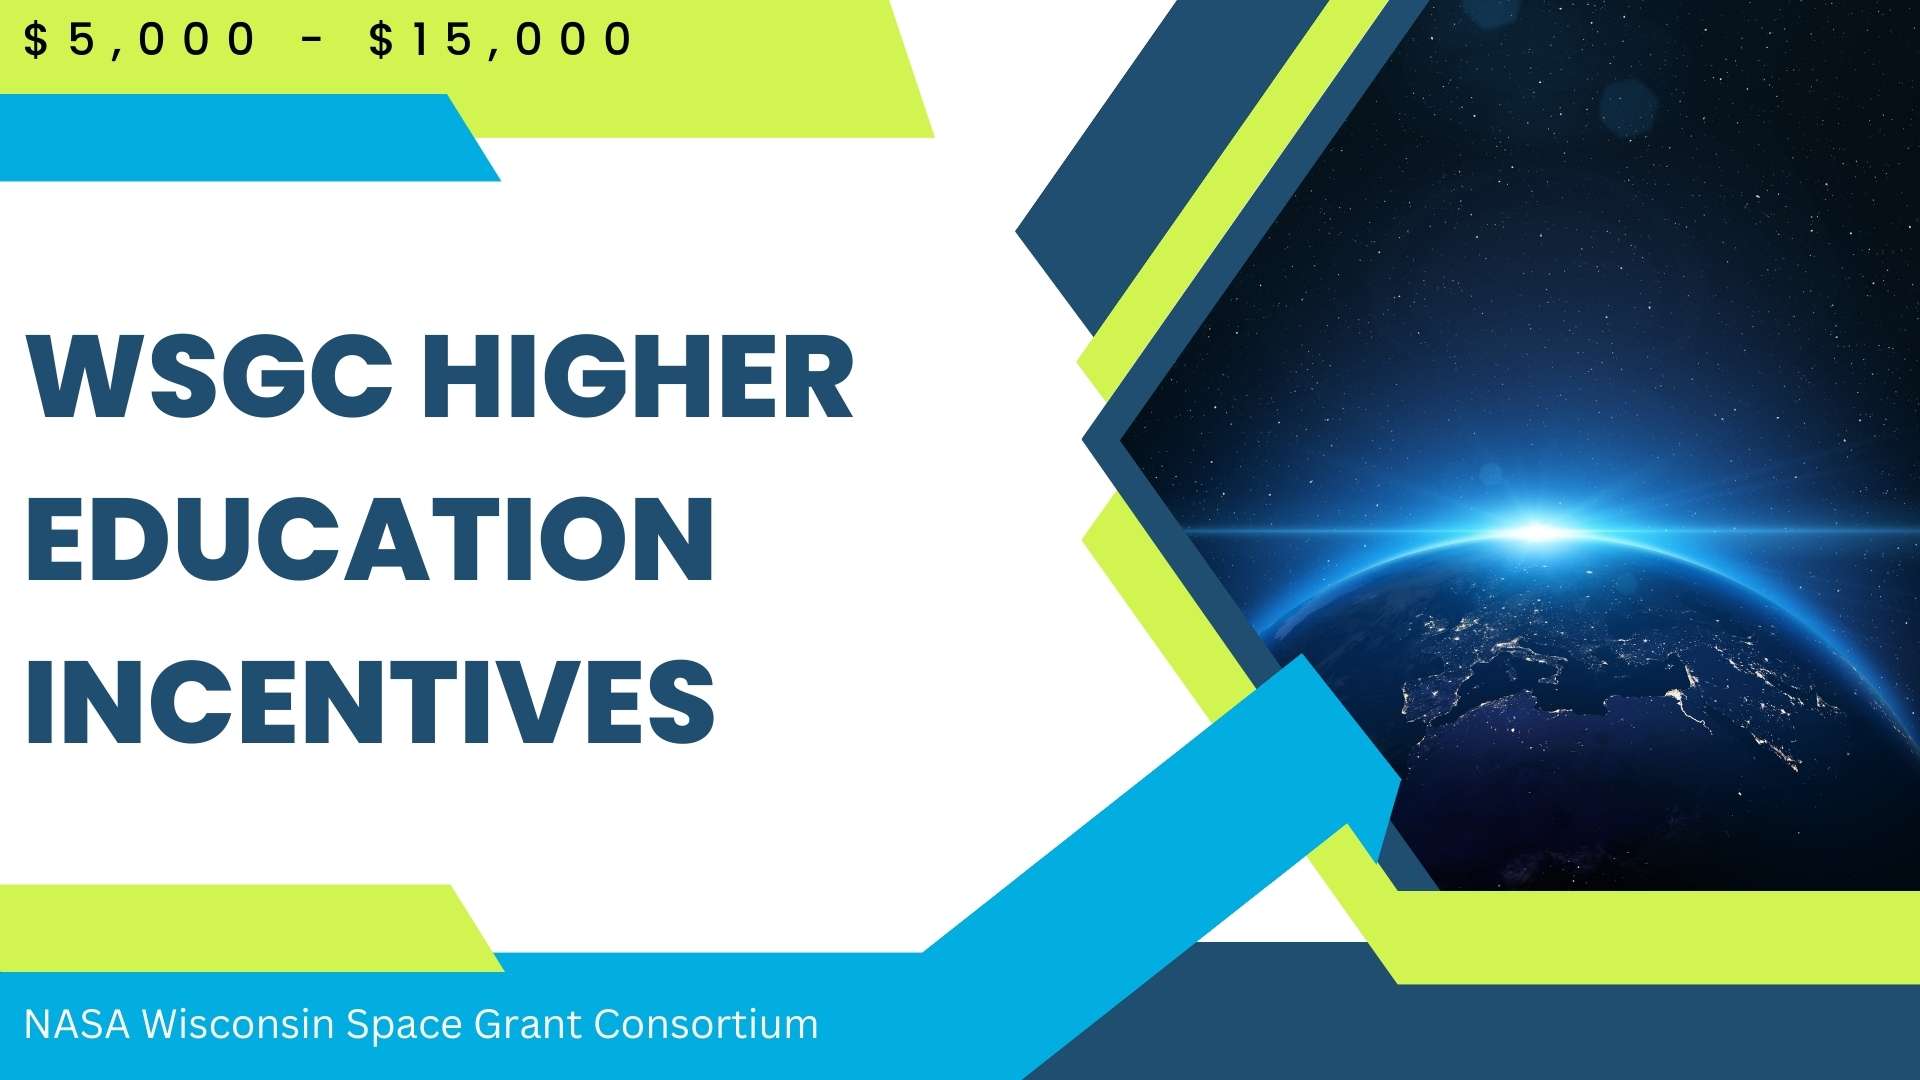 WSGC Higher Education Incentives